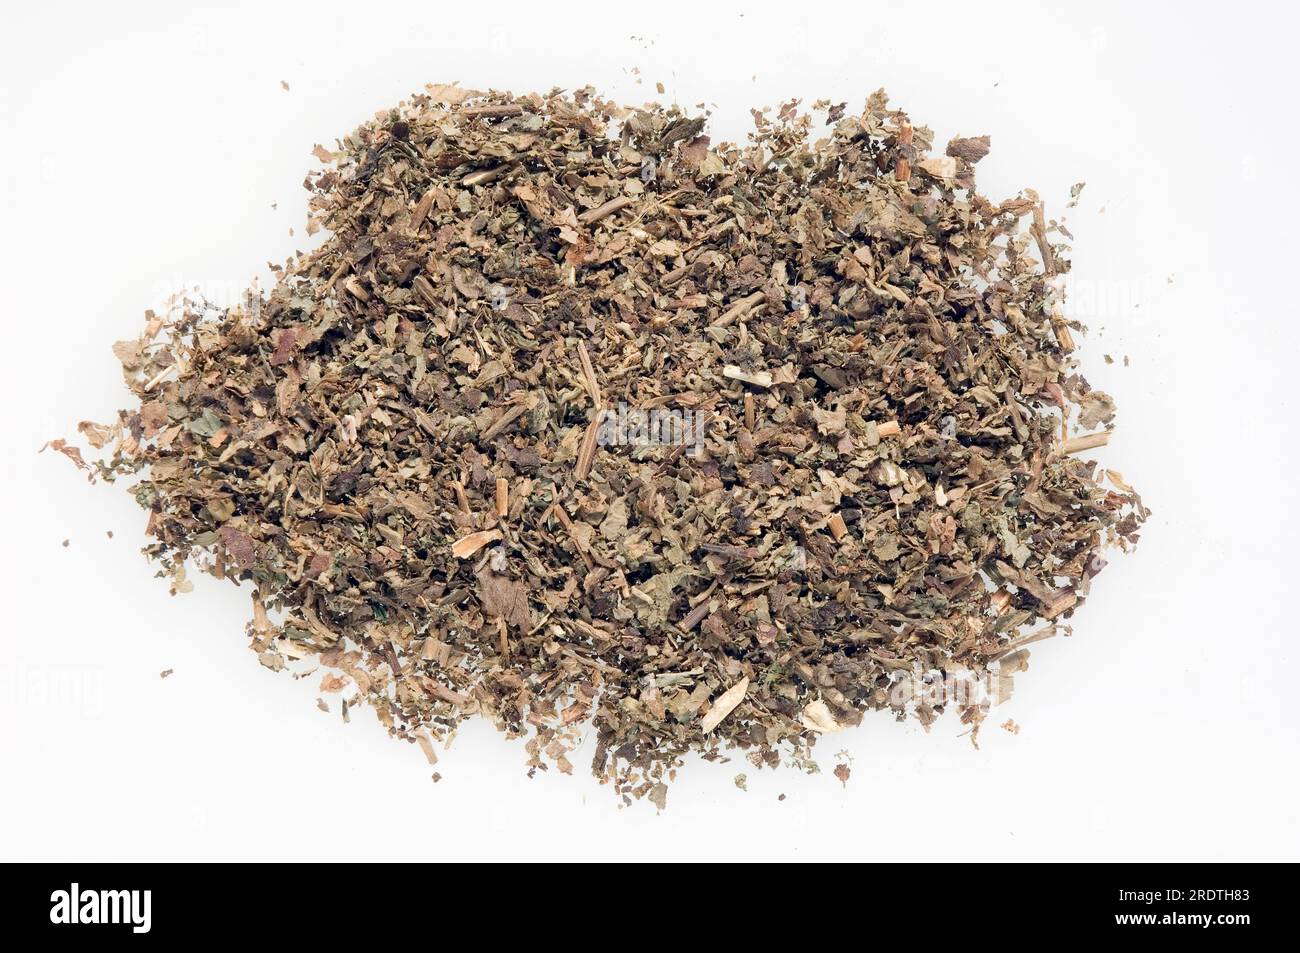 Dried Patchouli (Pogostemon cablin), Patchouly, Pachouli, burn incense, esotericism, aroma therapy, cut out, object Stock Photo